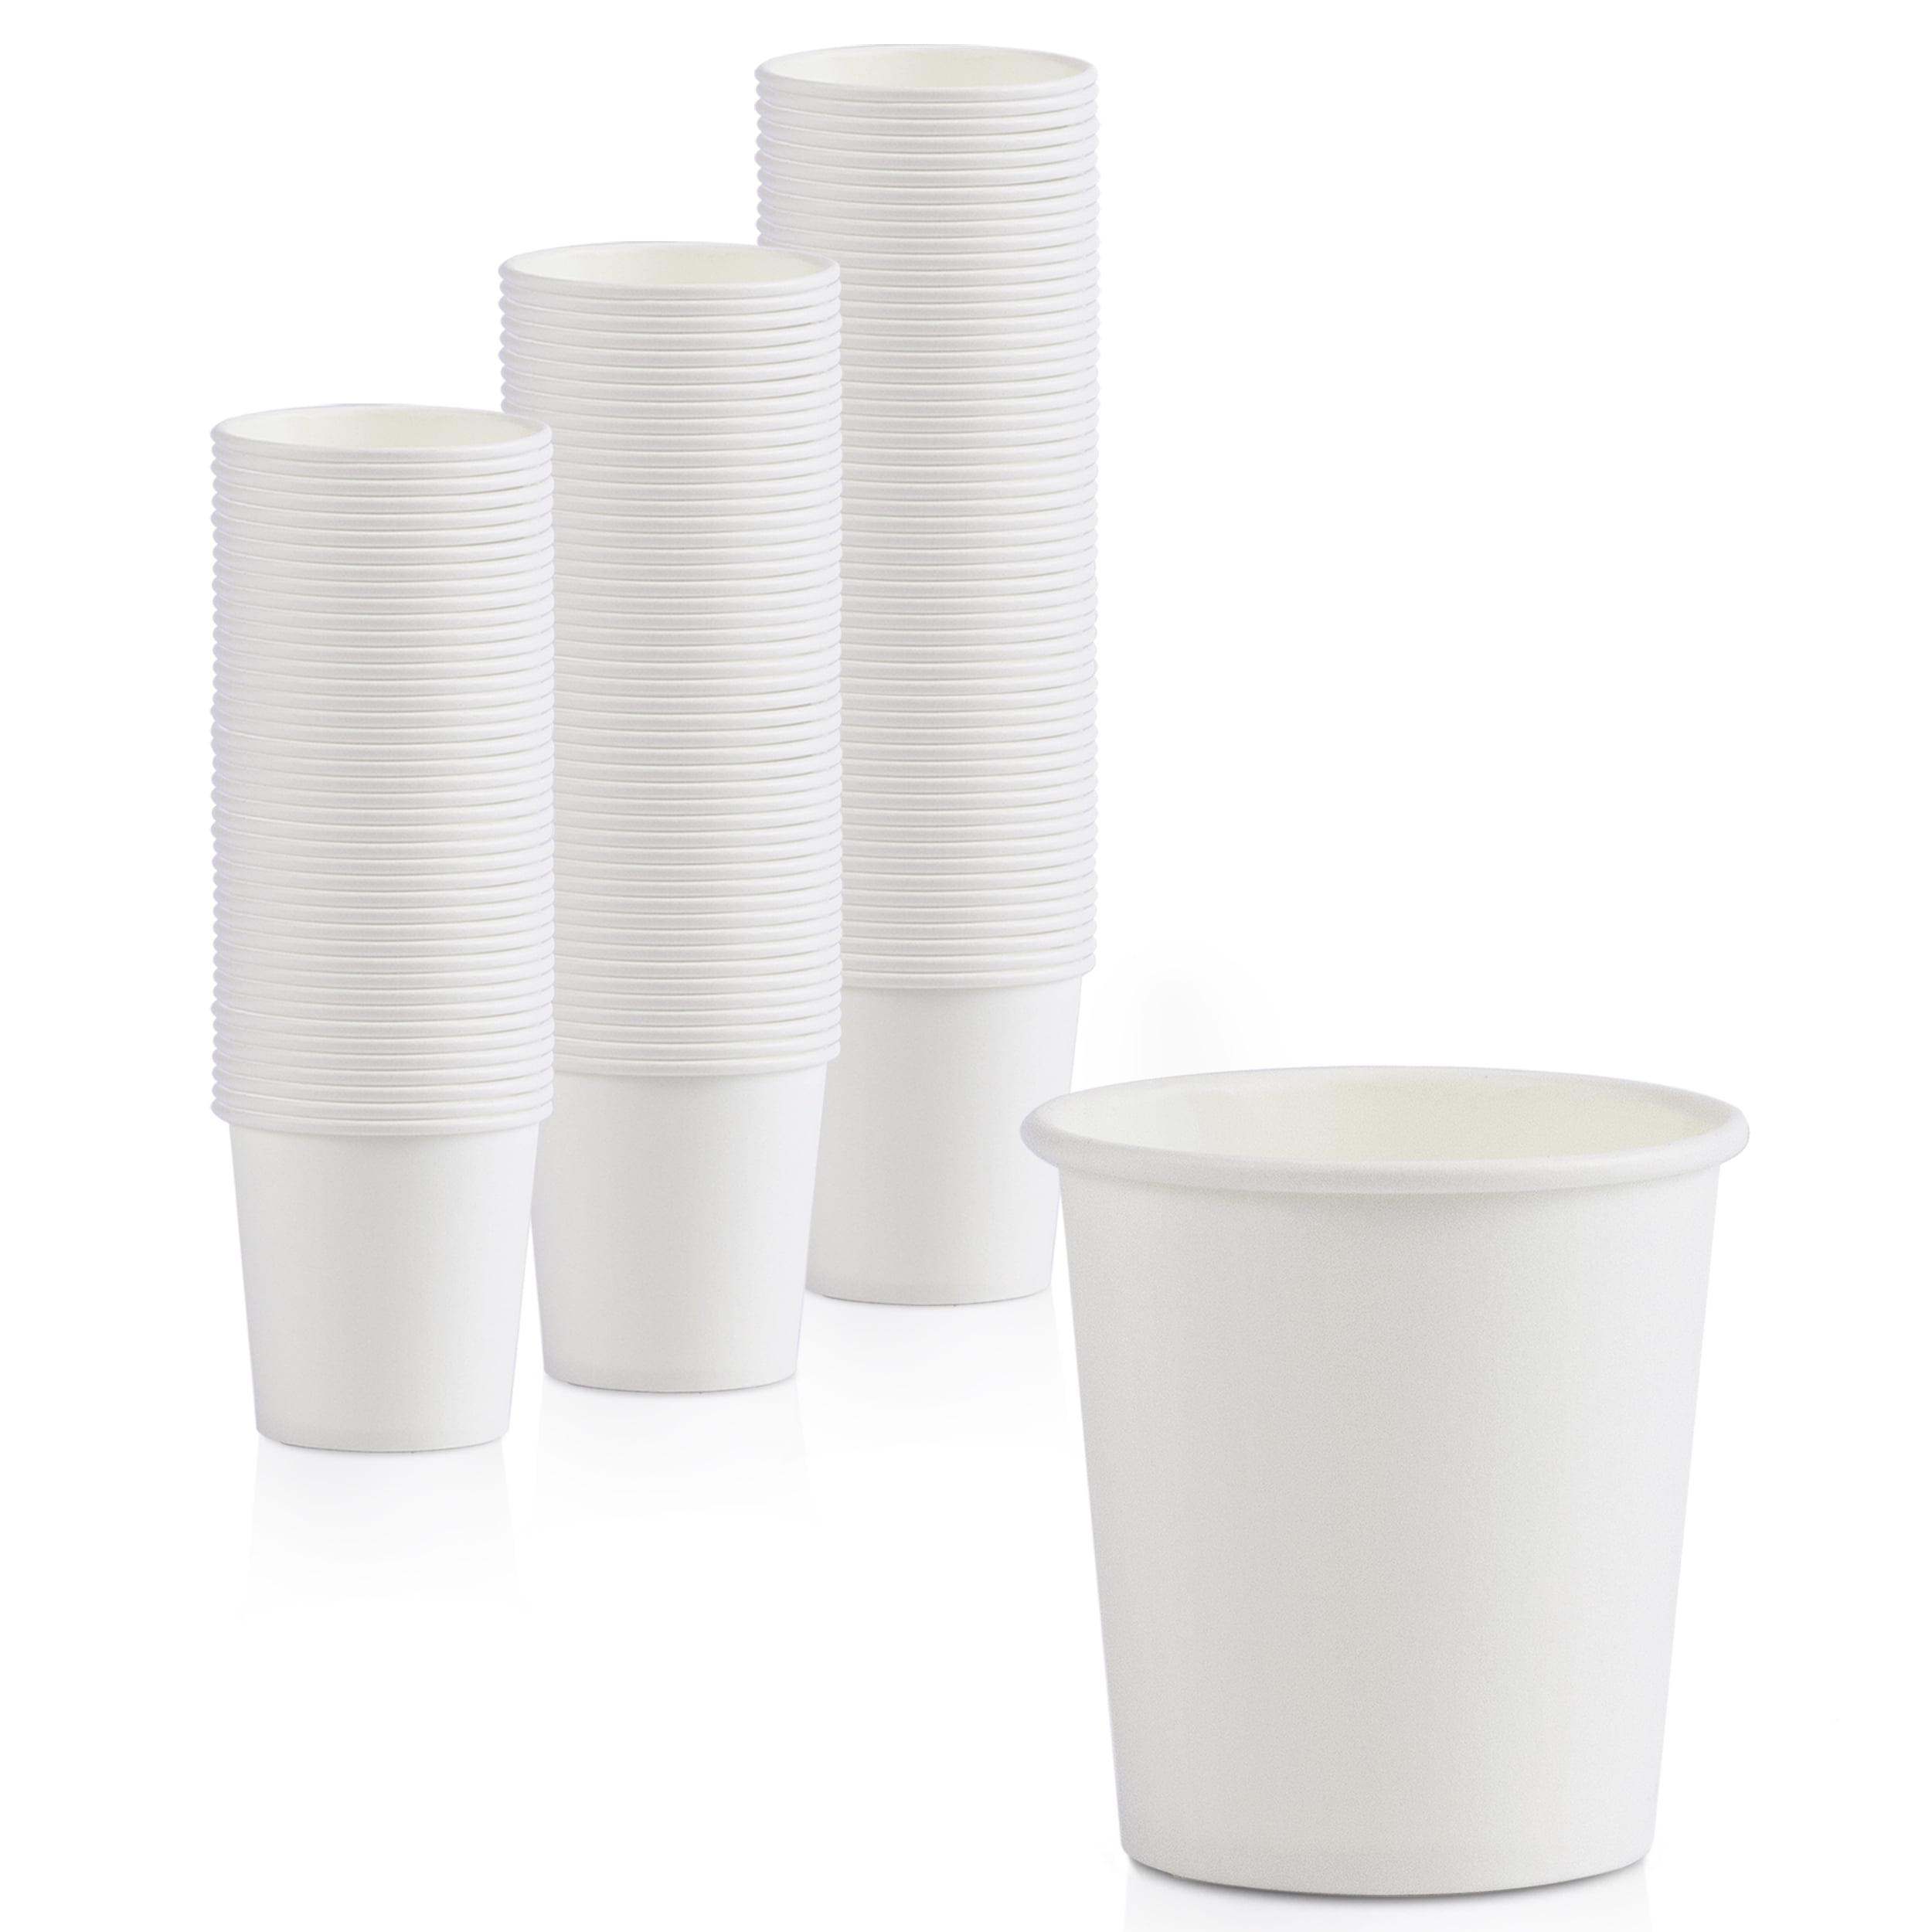 200 X Disposable Foam Cups Polystyrene Coffee Tea Cups for Hot Drinks 10oz/12oz 